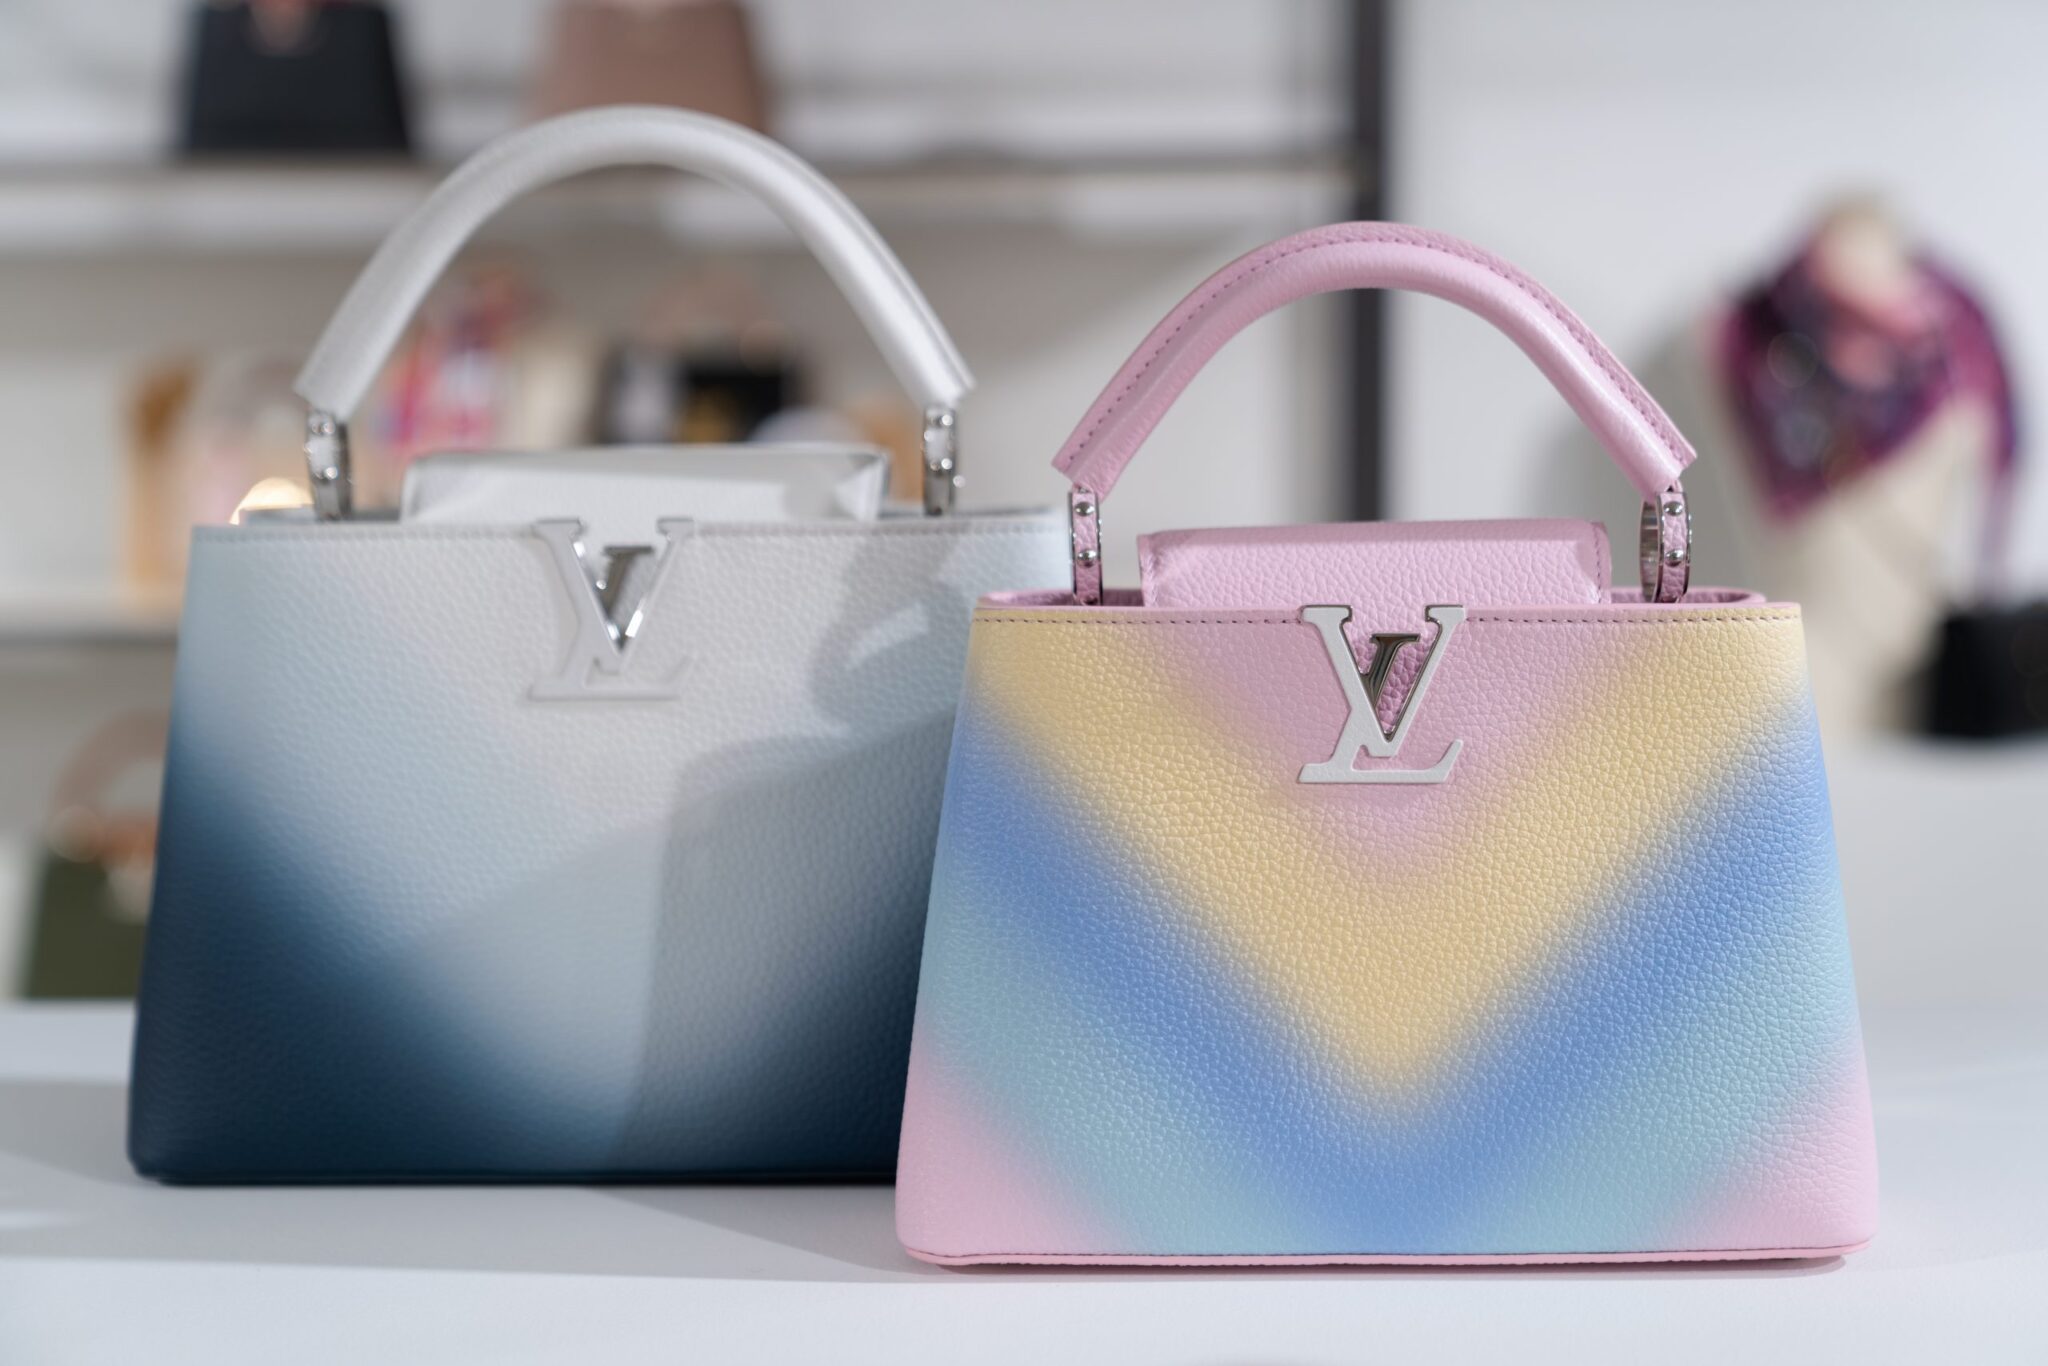 Louis Vuitton Cruise 2021 Collection - Game On - Spotted Fashion